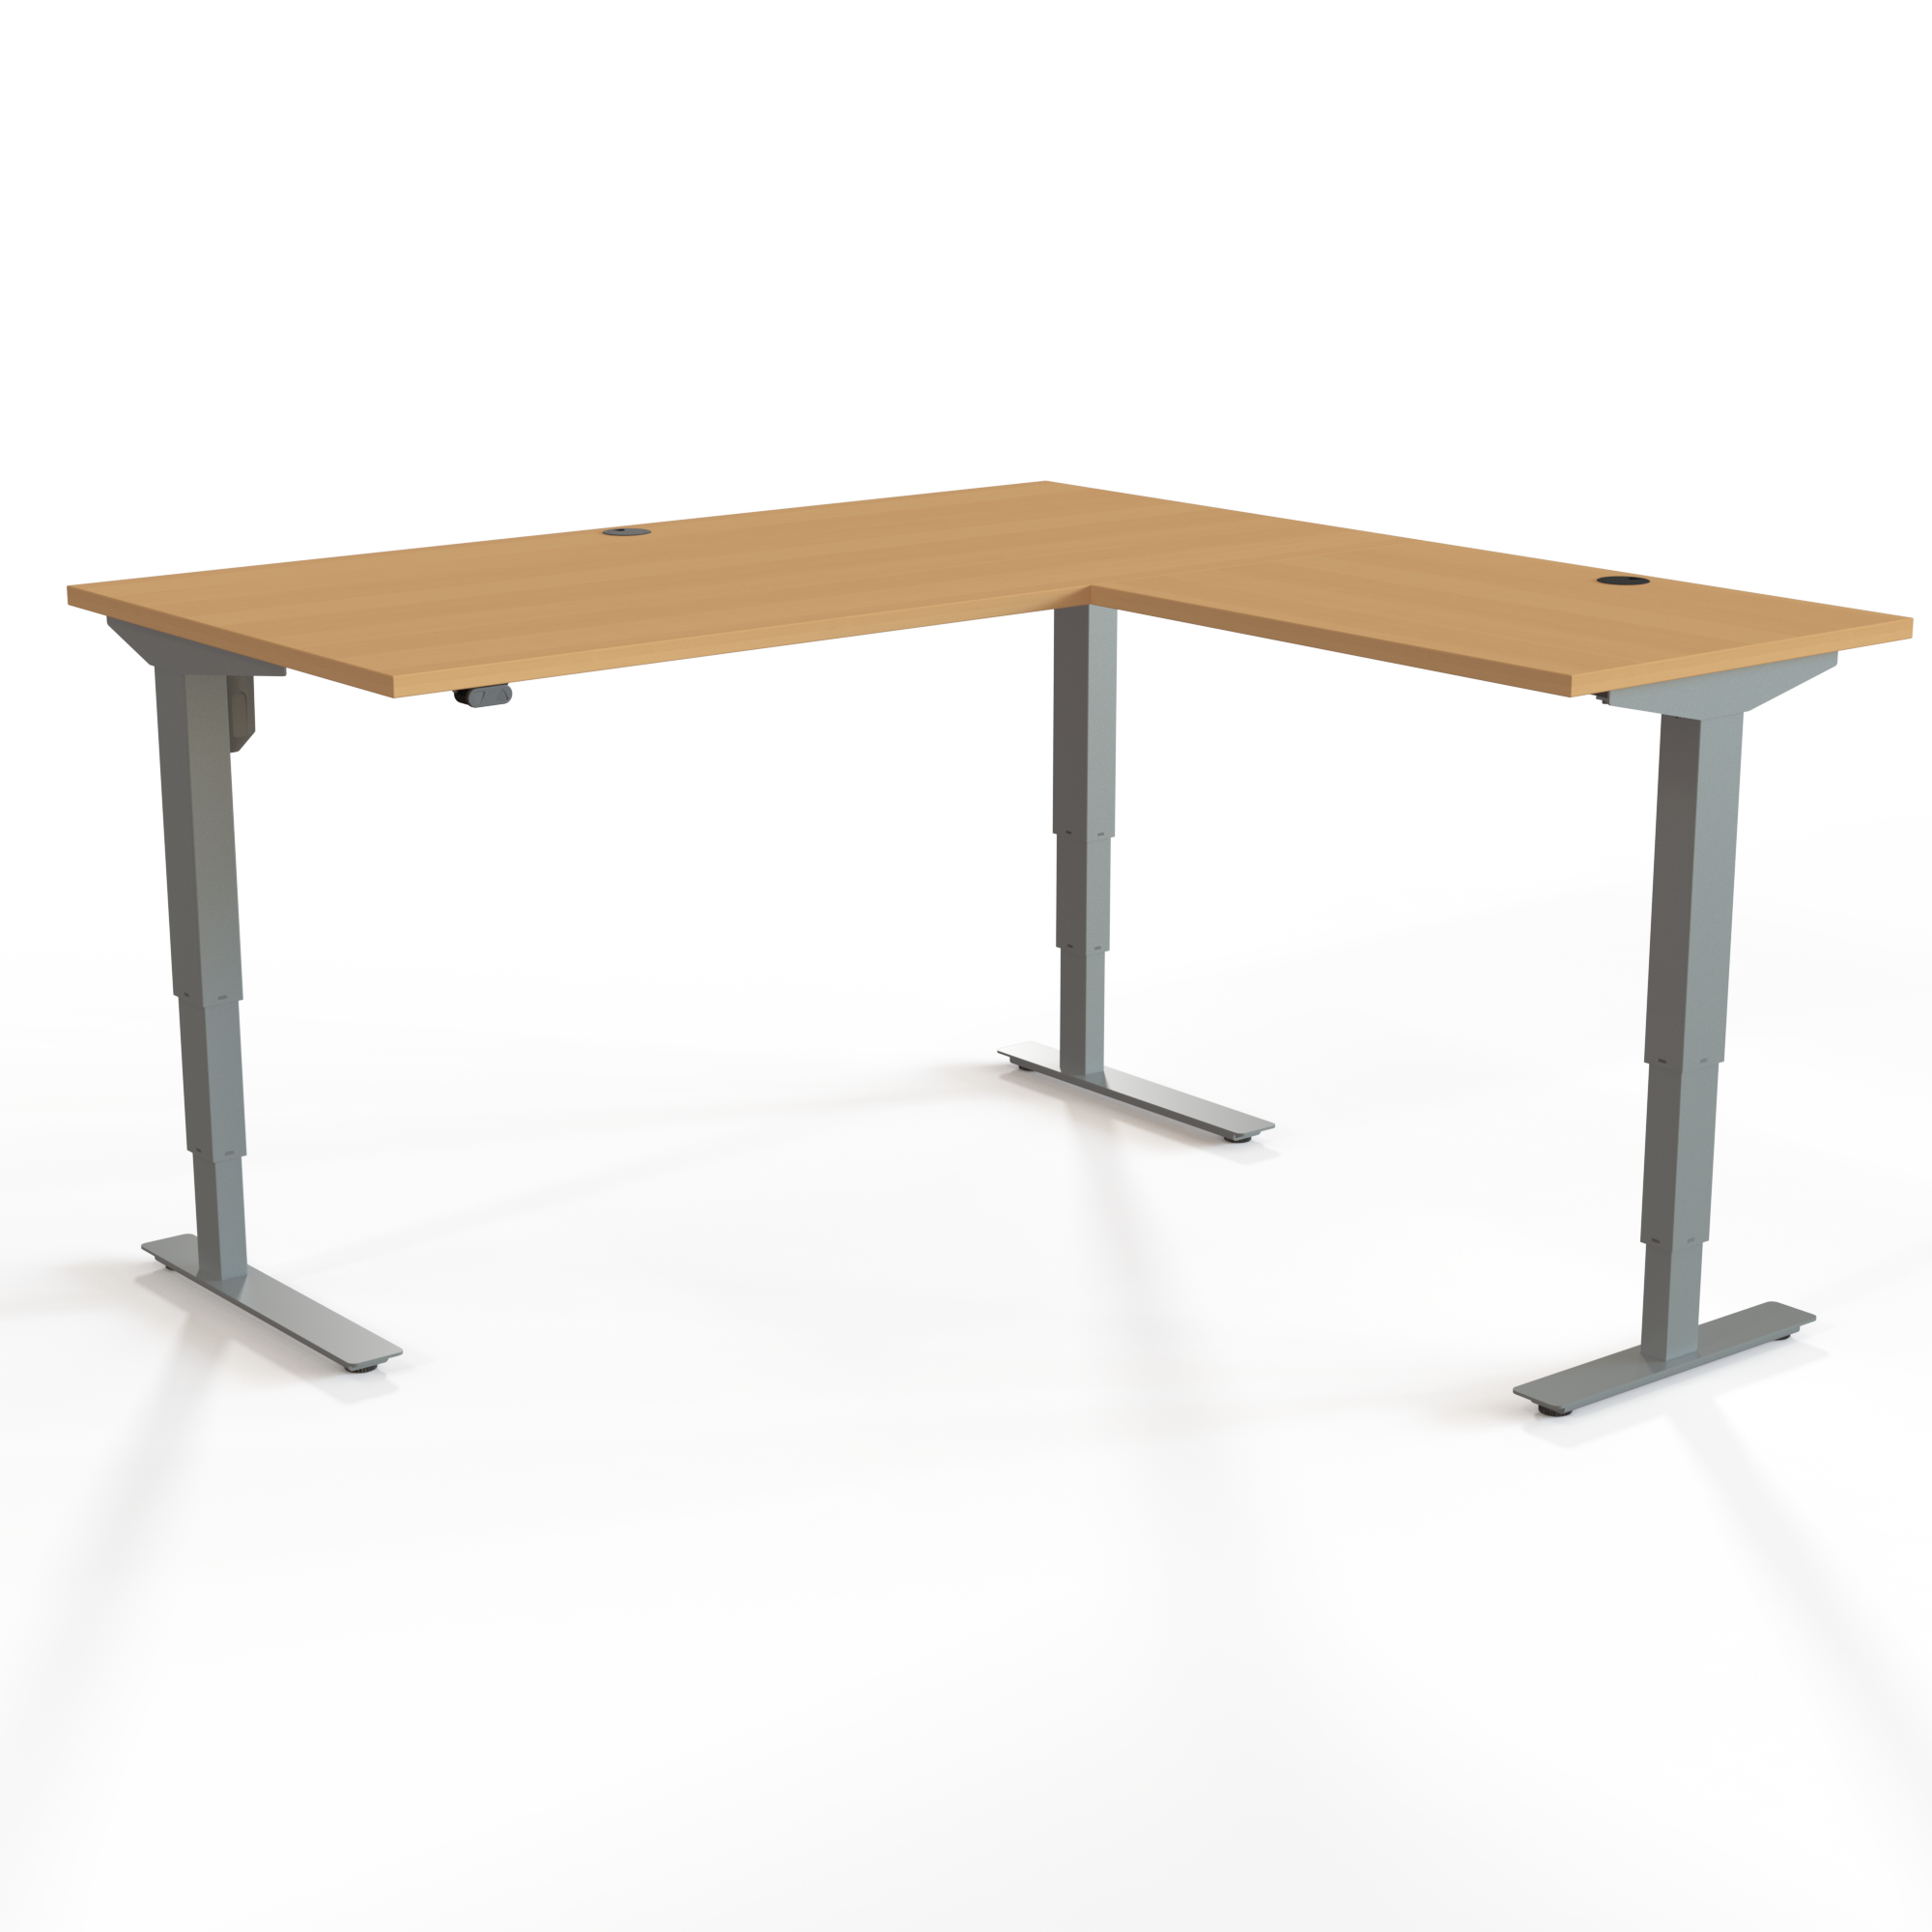 Electric Adjustable Desk | 160x160 cm | Beech with silver frame